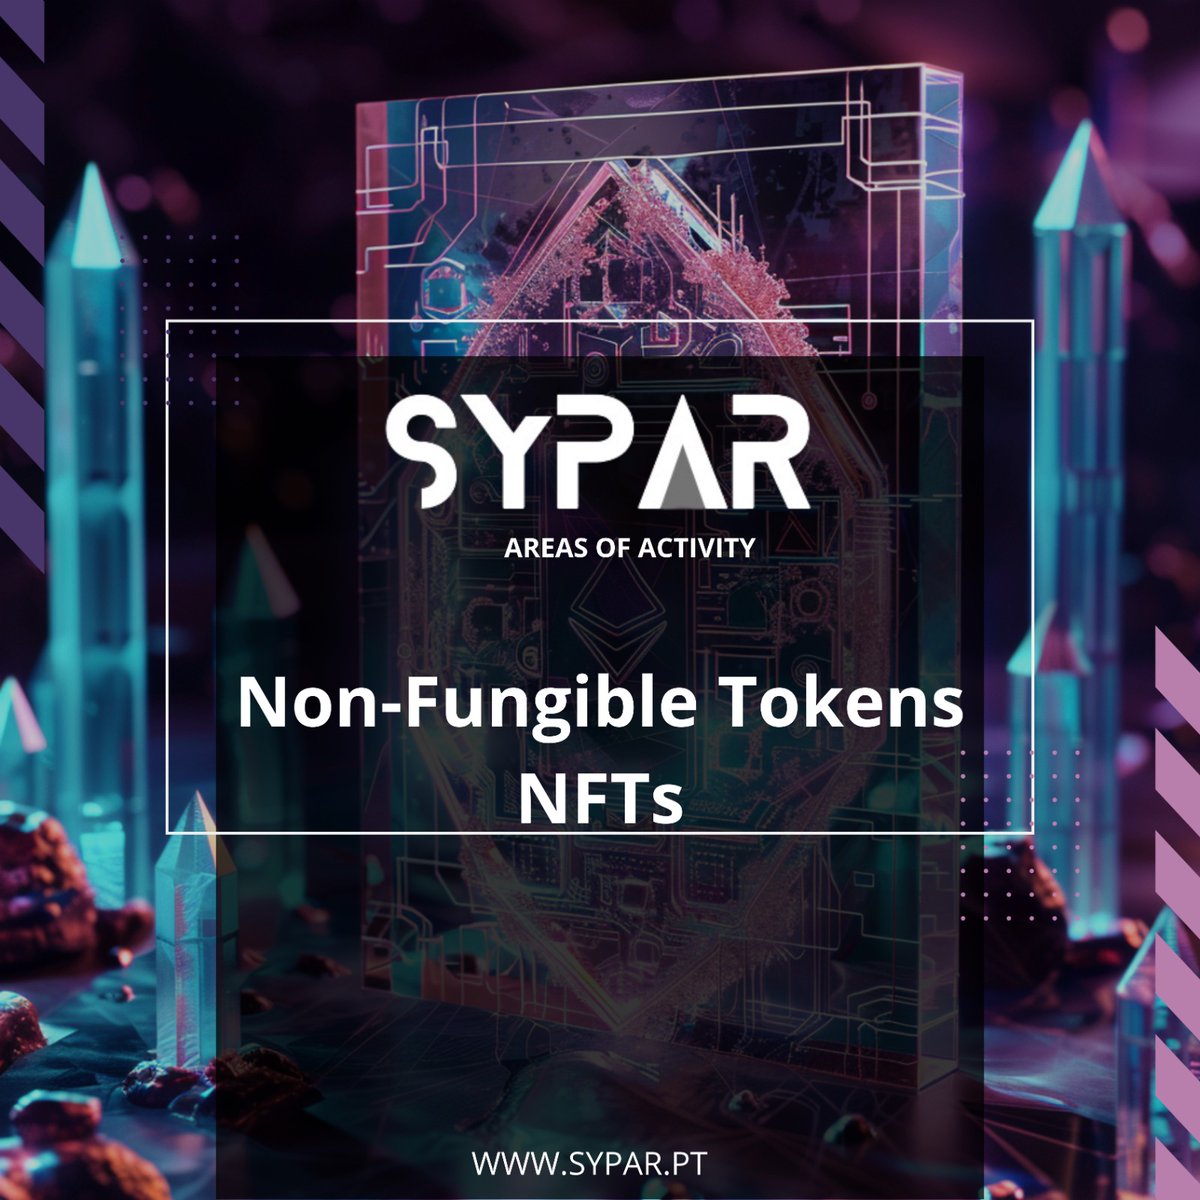 #Cryptocurrencies are categorized as either fungible, like #Bitcoin, which are interchangeable and consistent in value, or non-fungible tokens (#NFTs), which are unique #digitalassets linked to specific tangible or intangible items.